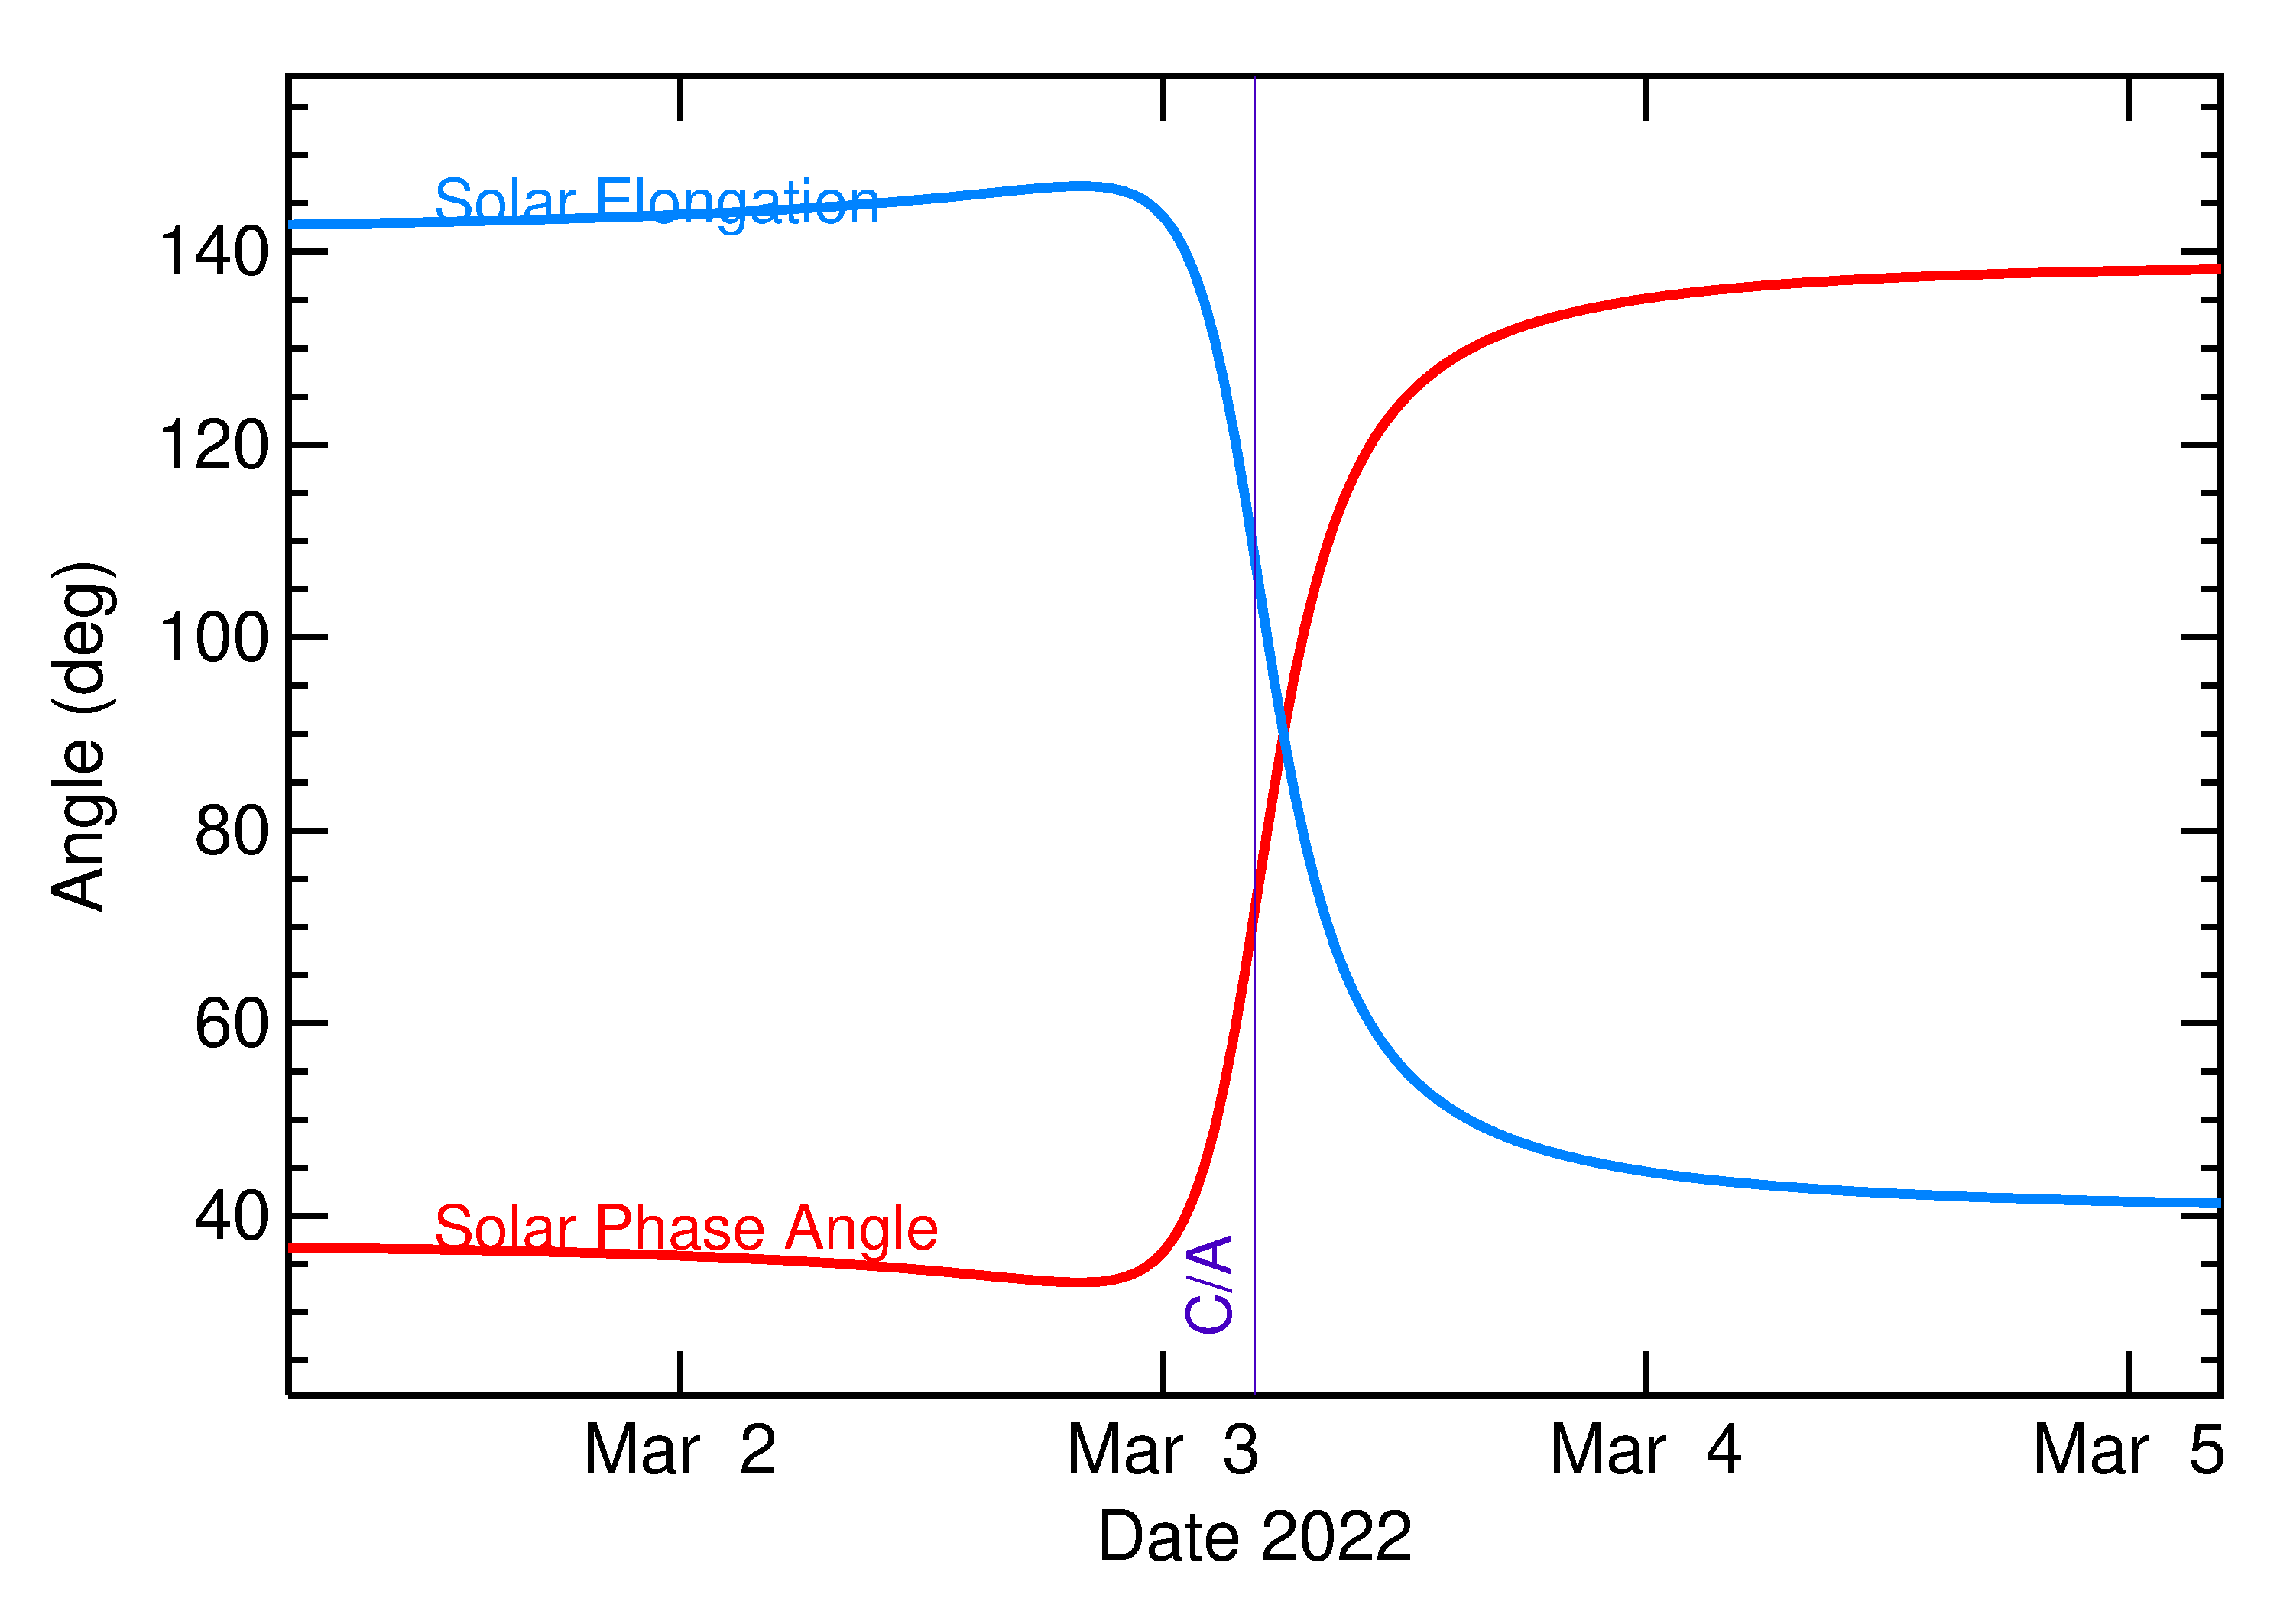 Solar Elongation and Solar Phase Angle of 2022 EQ in the days around closest approach